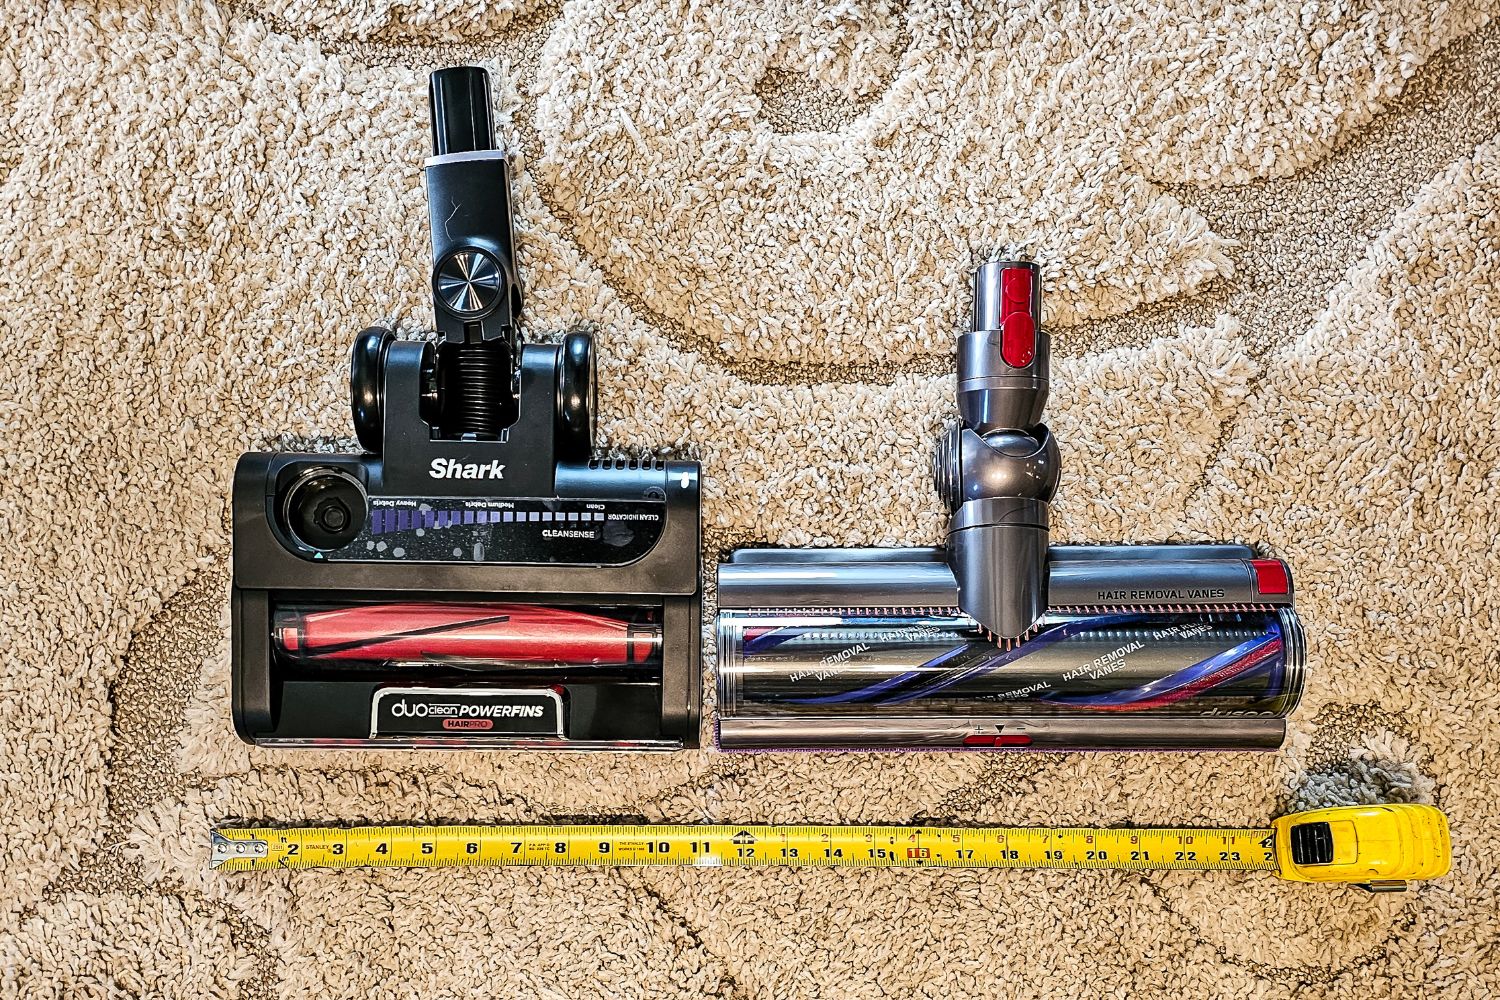 The cleaning heads of Dyson vs Shark on a rug next to a measuring tape showing the Dyson head is wider.